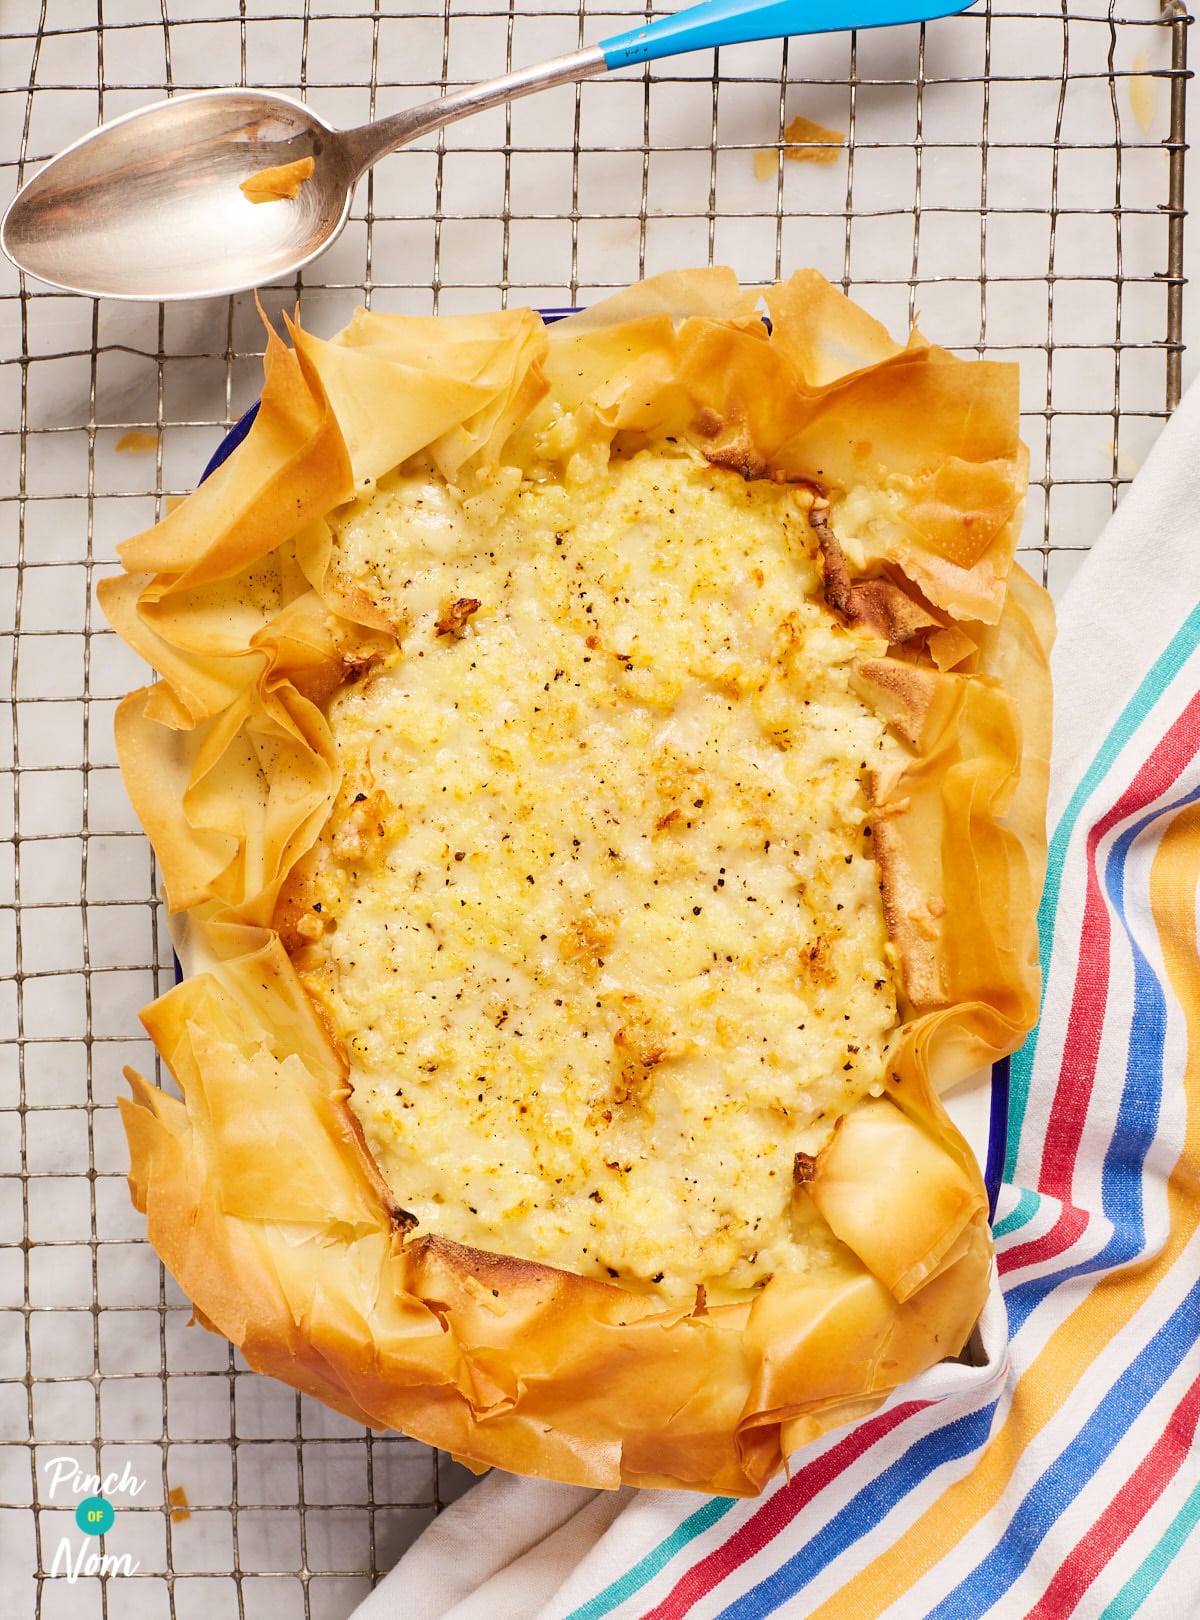 Cheese, Onion and Potato Pie - Pinch of Nom Slimming Recipes